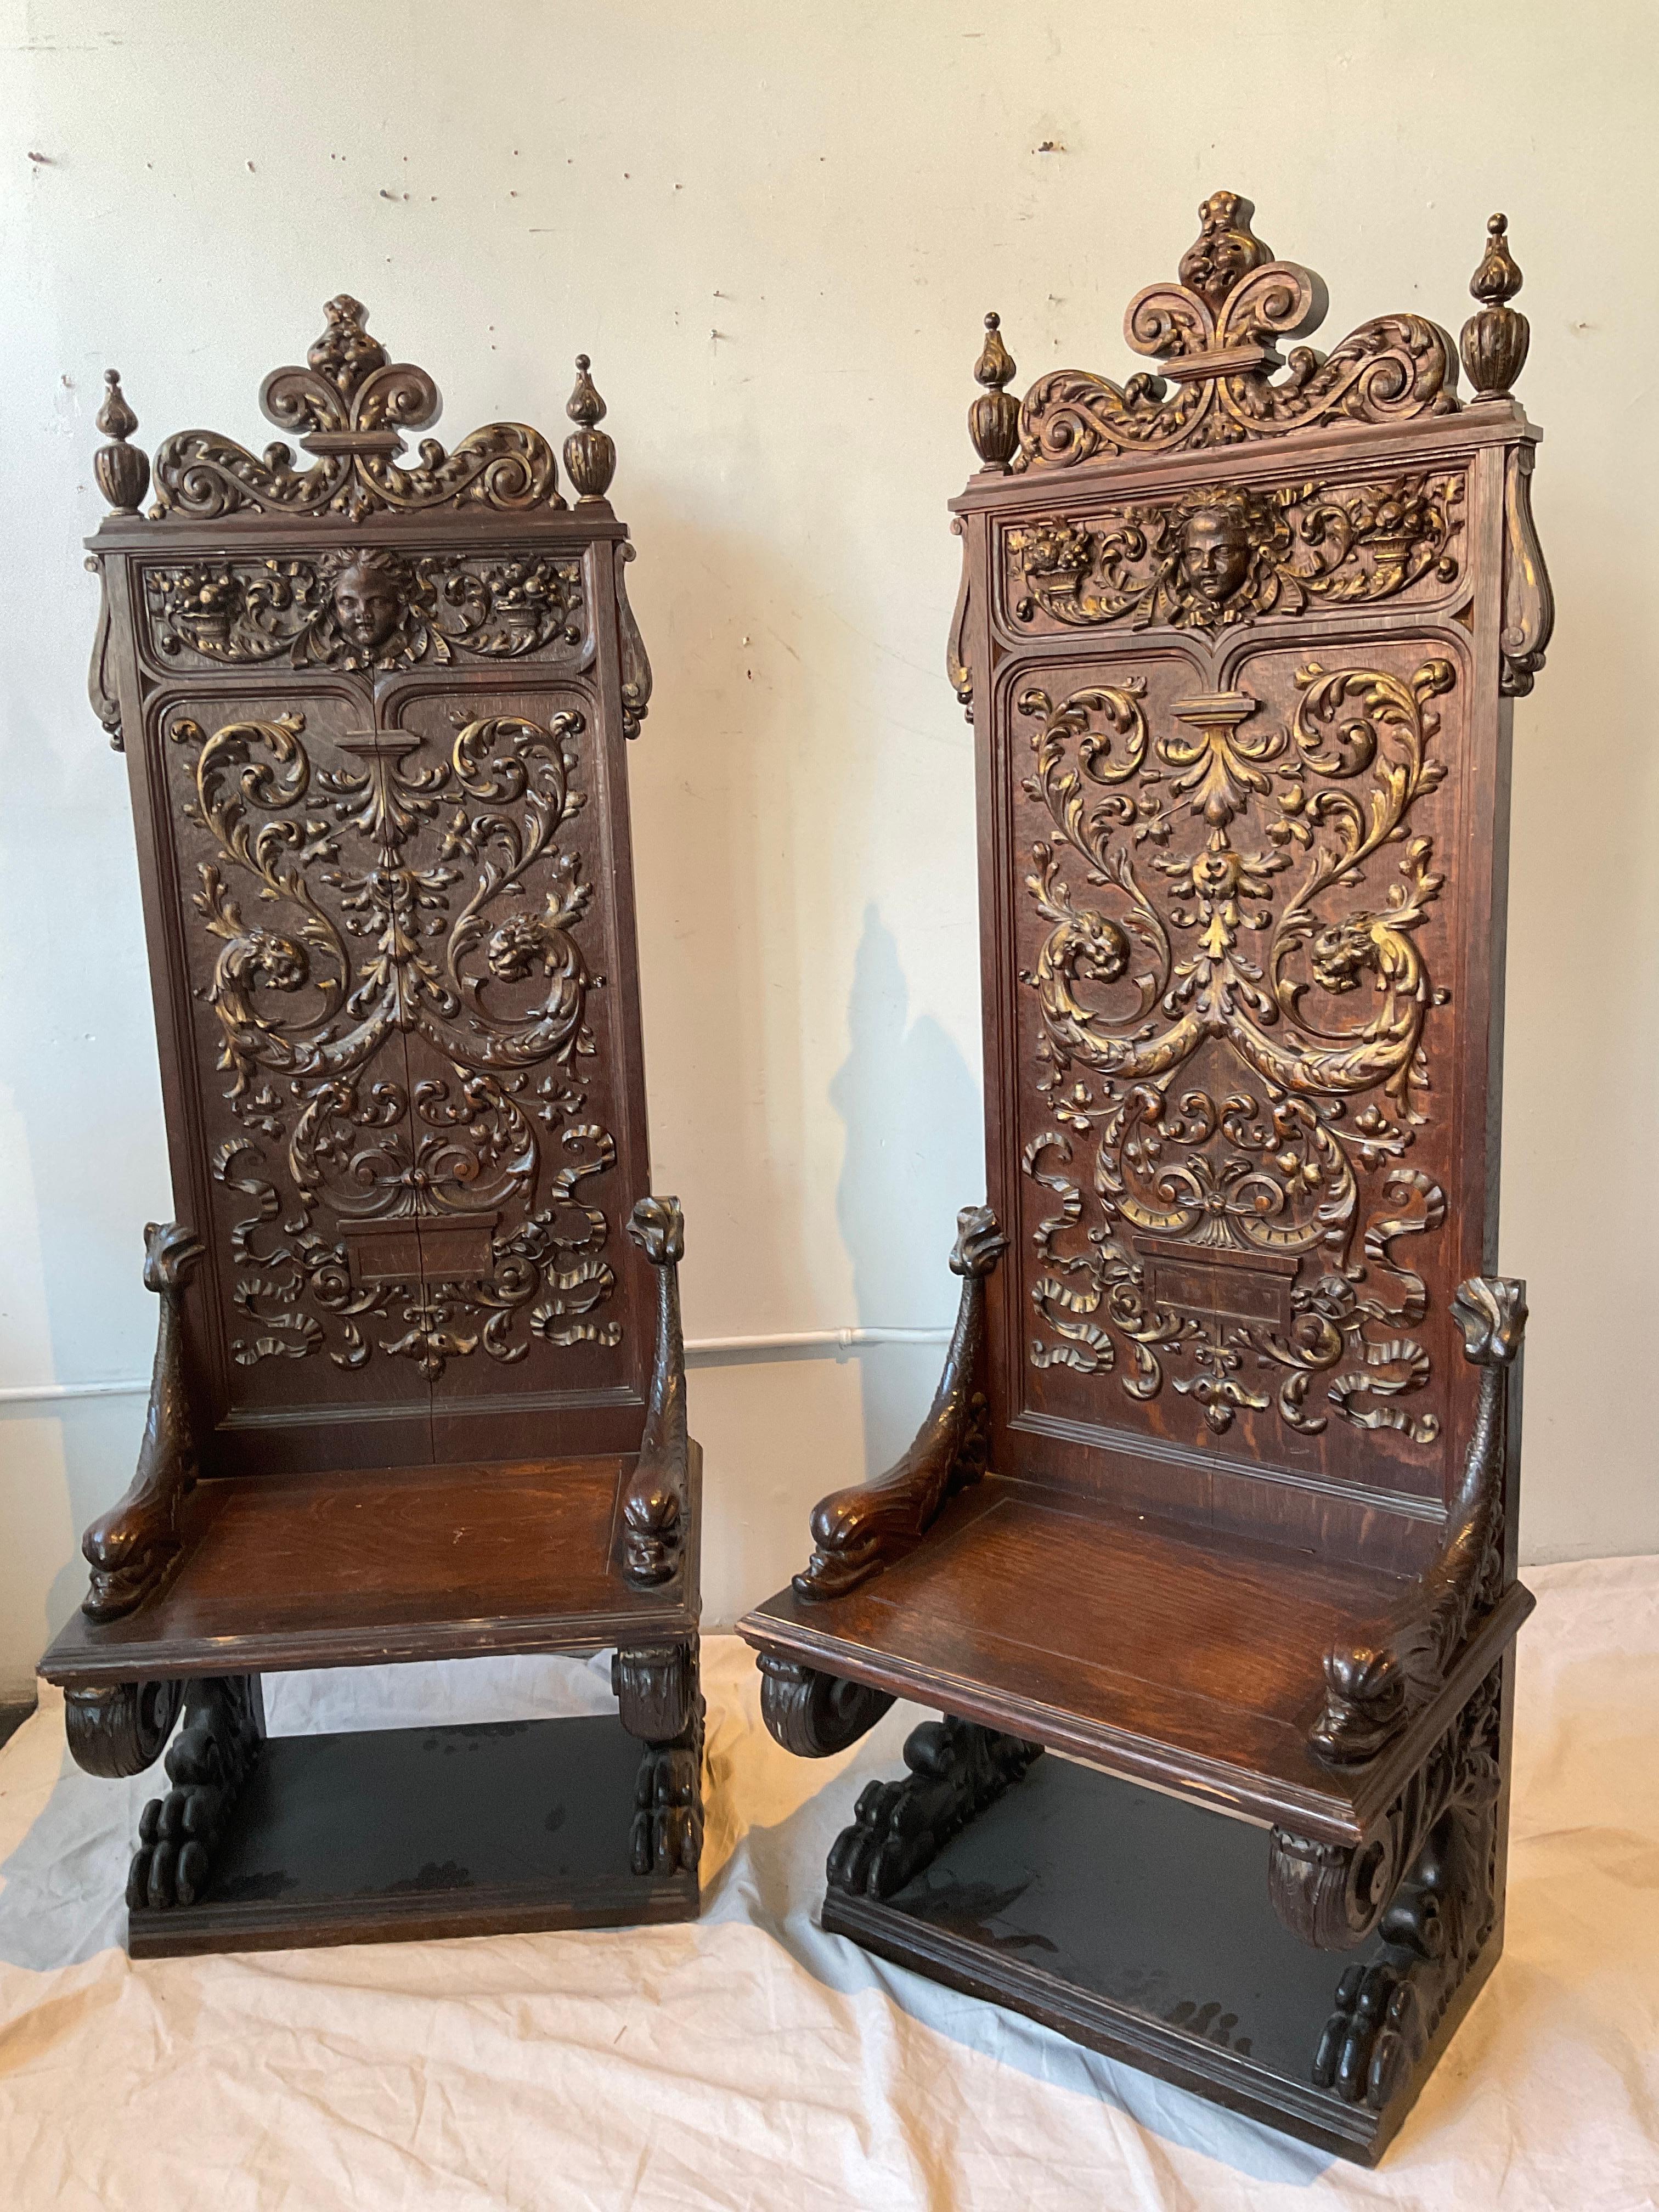 Pair of 1890s tall Gothic wood chairs  Faces, panthers, cornucopias, dolphins, lion paws all carved into the wood.
Split down middle of chair as shown in last image.